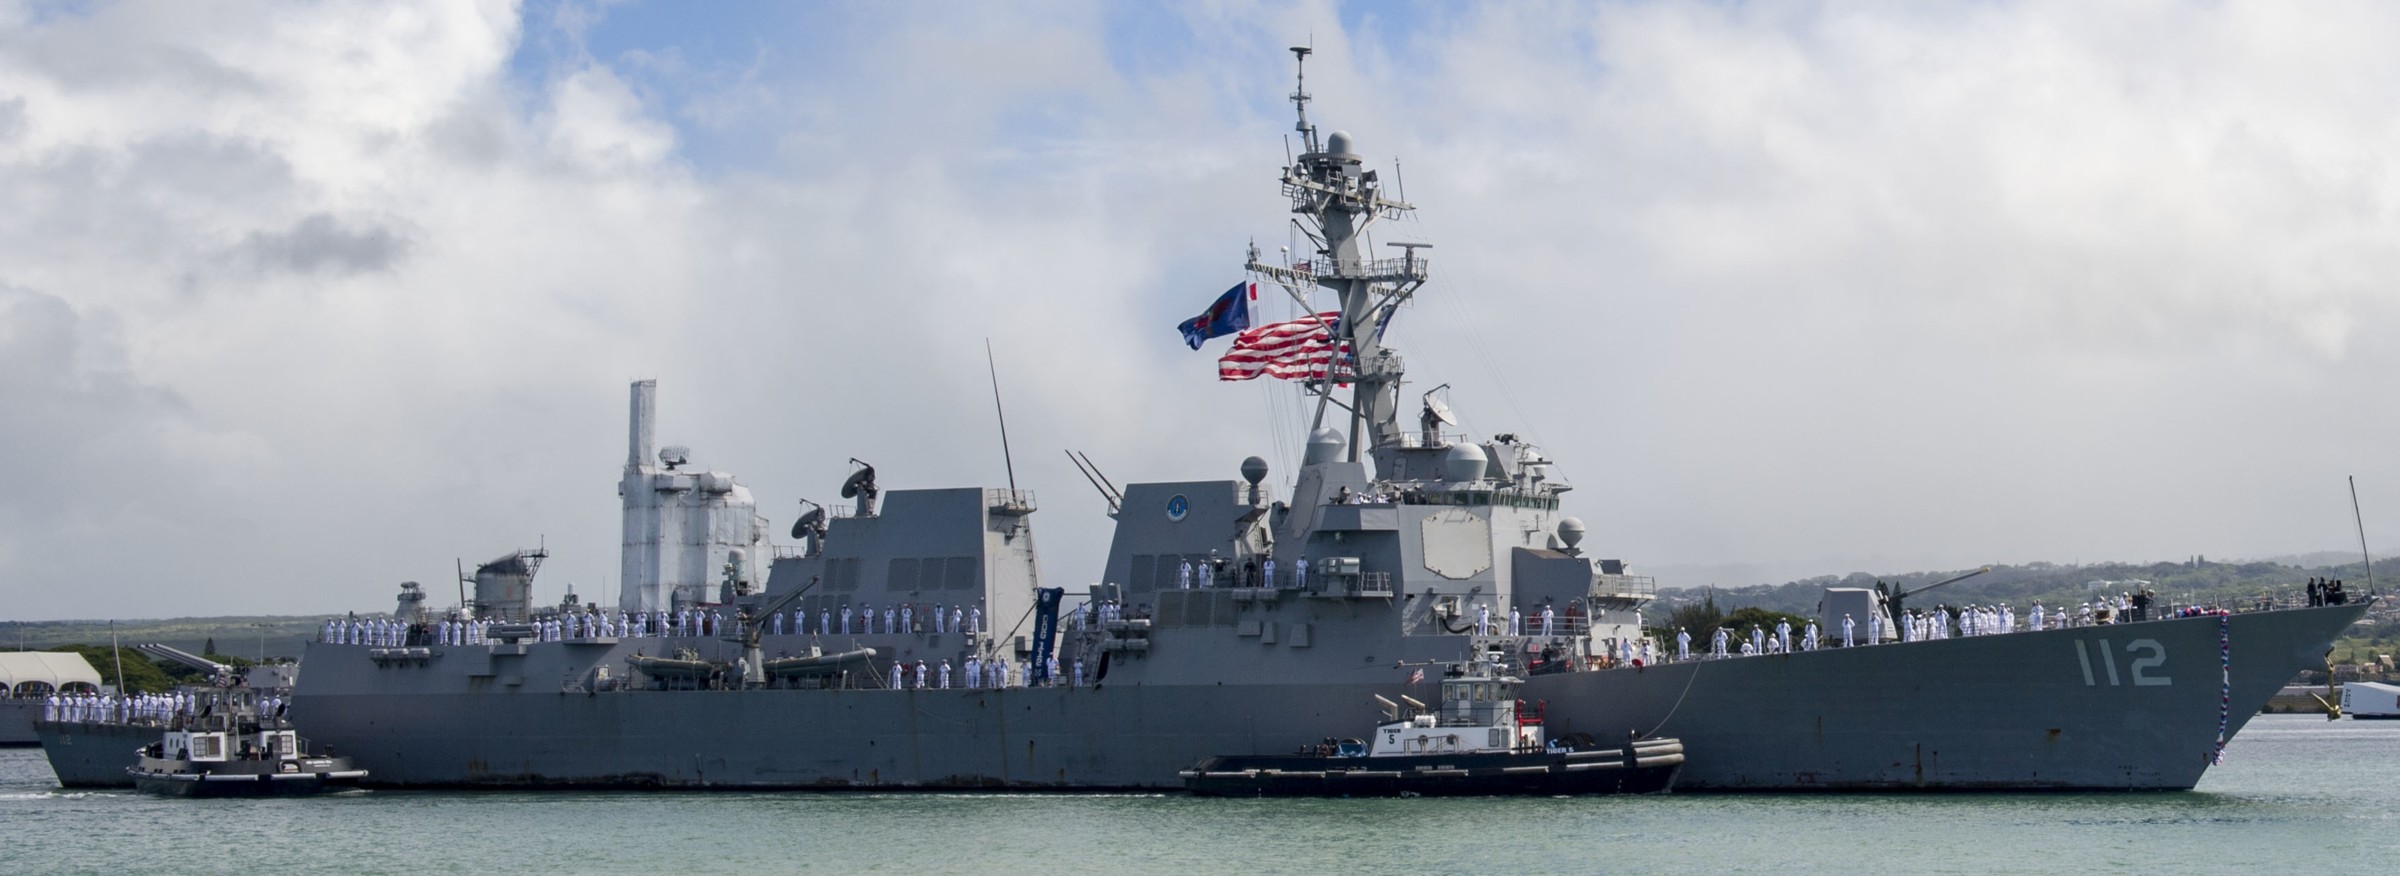 ddg-112 uss michael murphy arleigh burke class guided missile destroyer aegis us navy 36